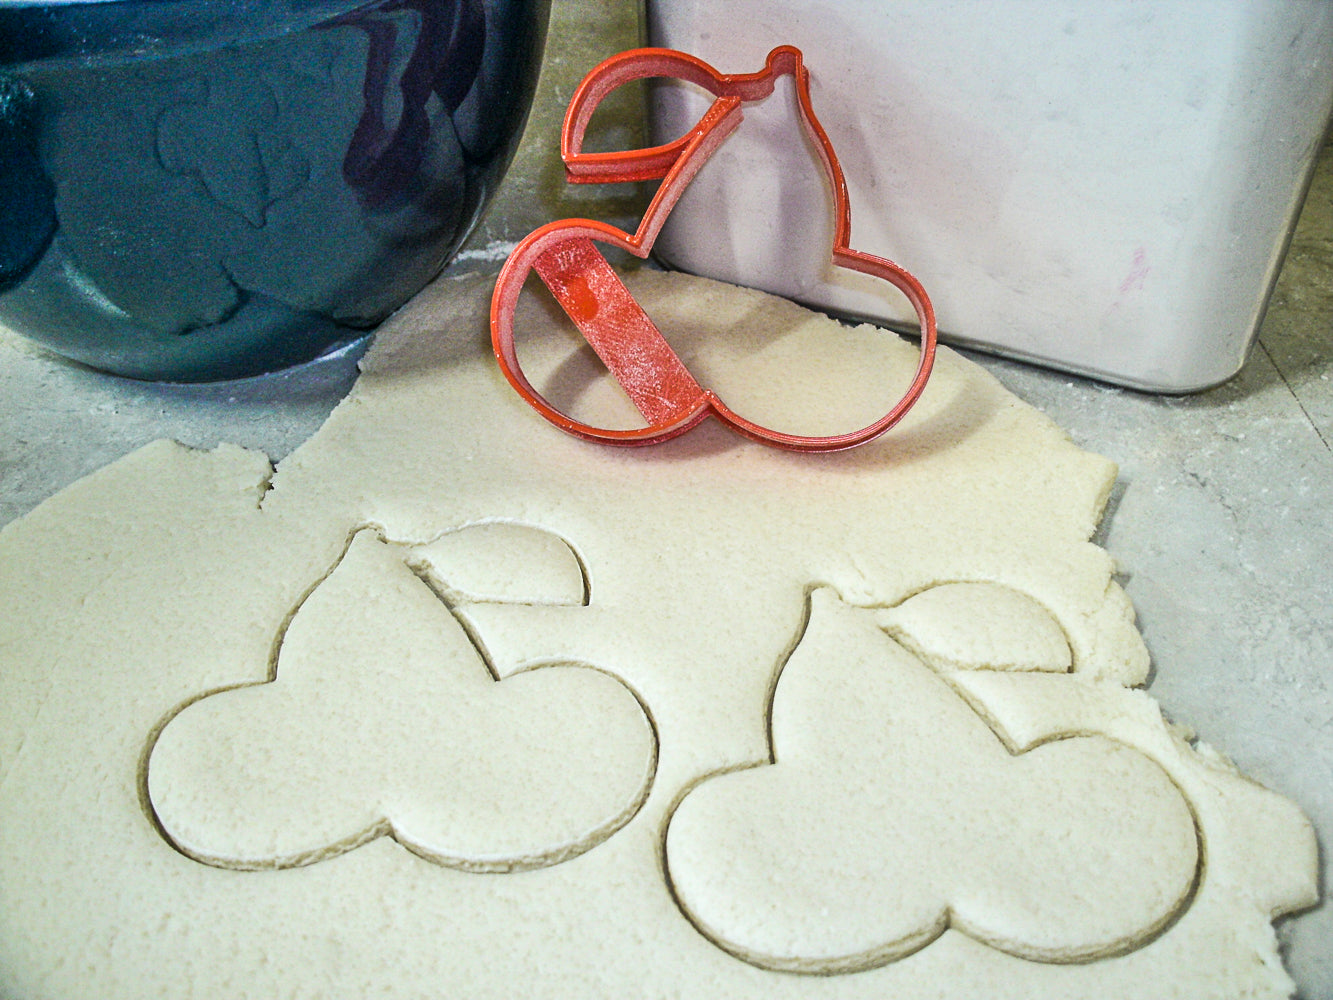 Pac-Man Pacman Video Arcade Game Ghost Cherry Set Of 3 Cookie Cutters USA PR1074